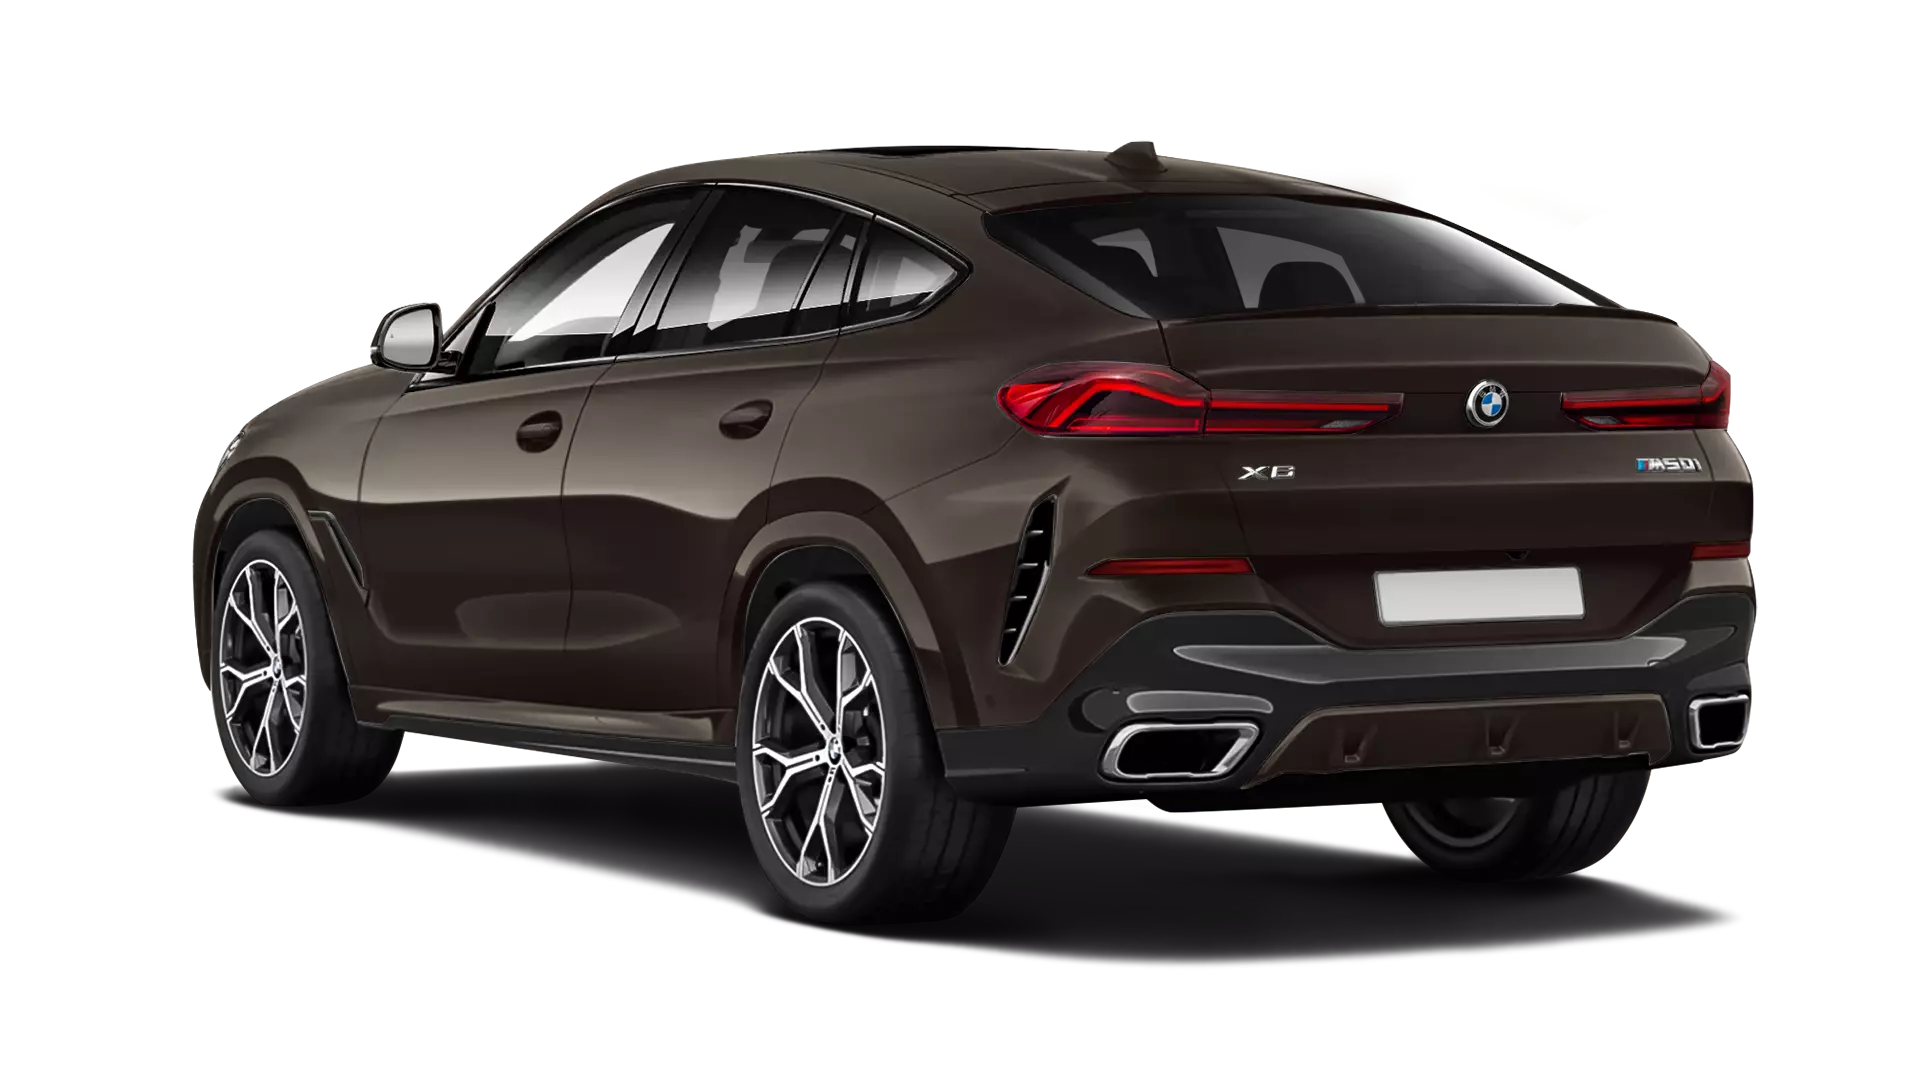 BMW X6 G06 stock rear view in Sparkling Brown color